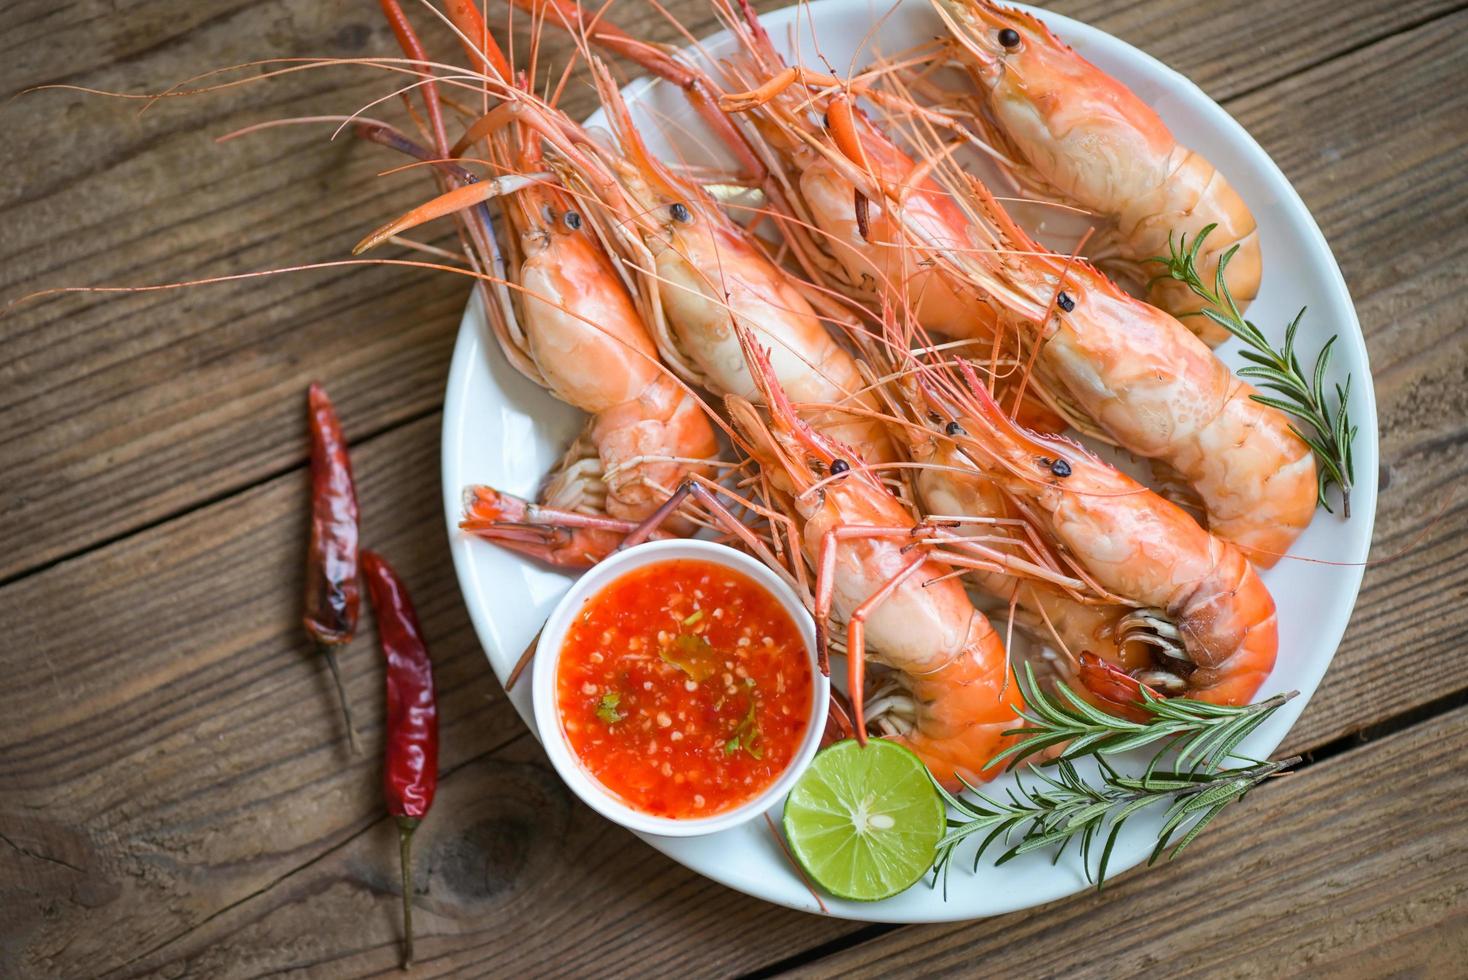 shrimp grilled delicious seasoning spices on white plate background appetizing cooked shrimps baked prawns rosemary lemon lime pepper, Seafood shelfish with seafood sauce photo